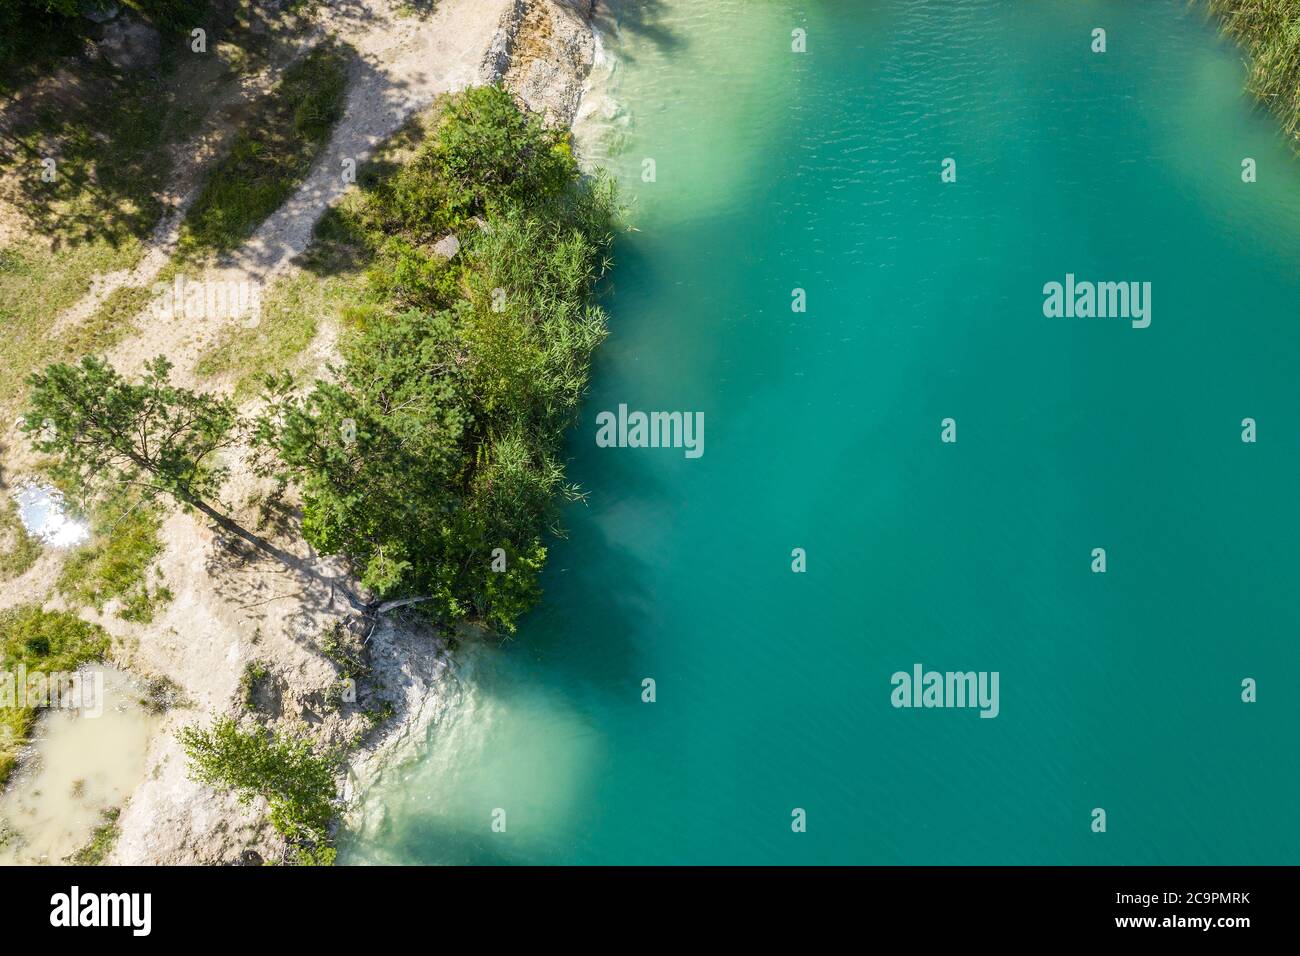 aerial top view of quarry lake with clear turquoise water and green trees ashore Stock Photo